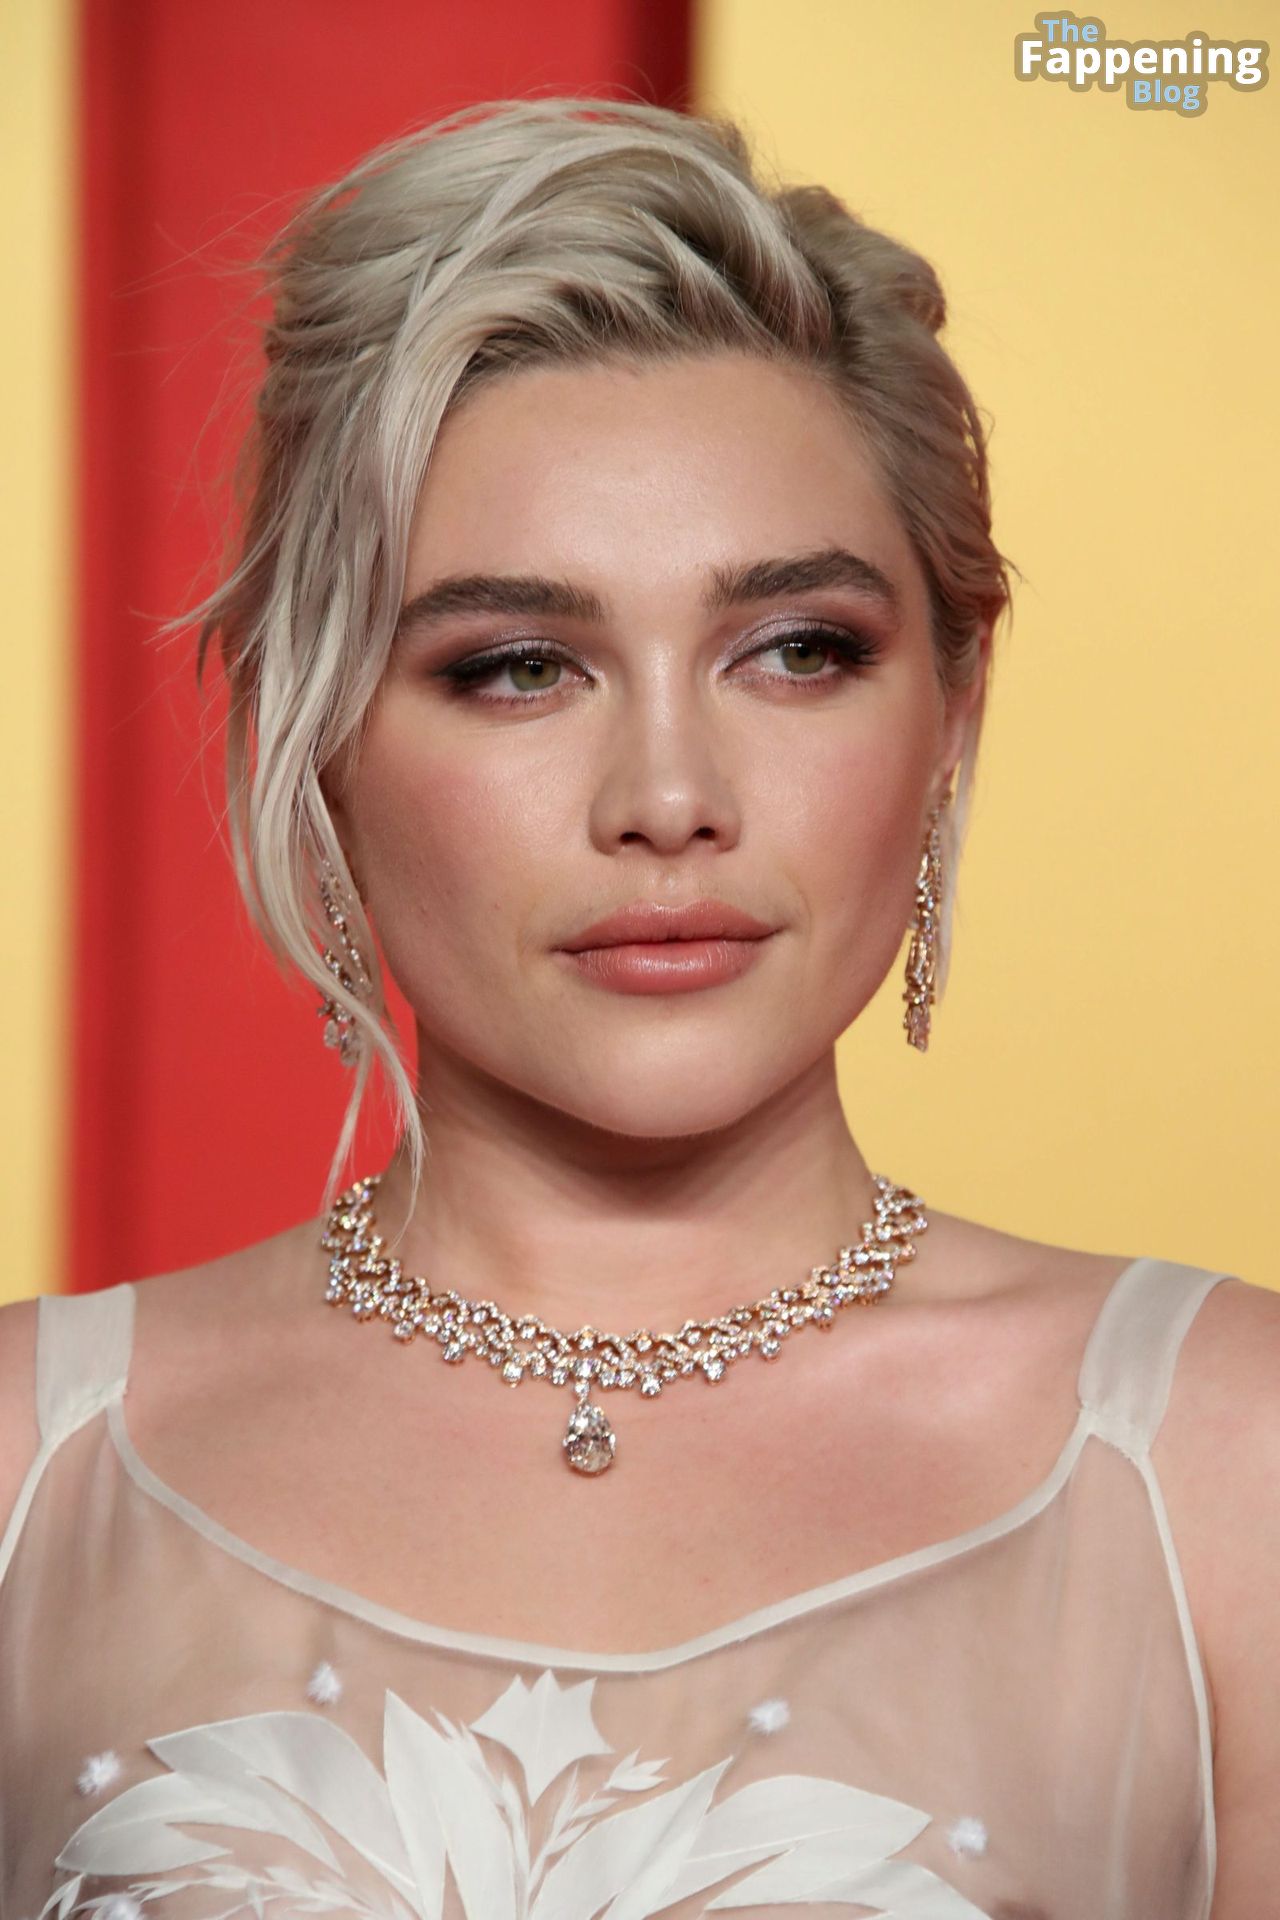 Florence-Pugh-Nude-9-The-Fappening-Blog.jpg